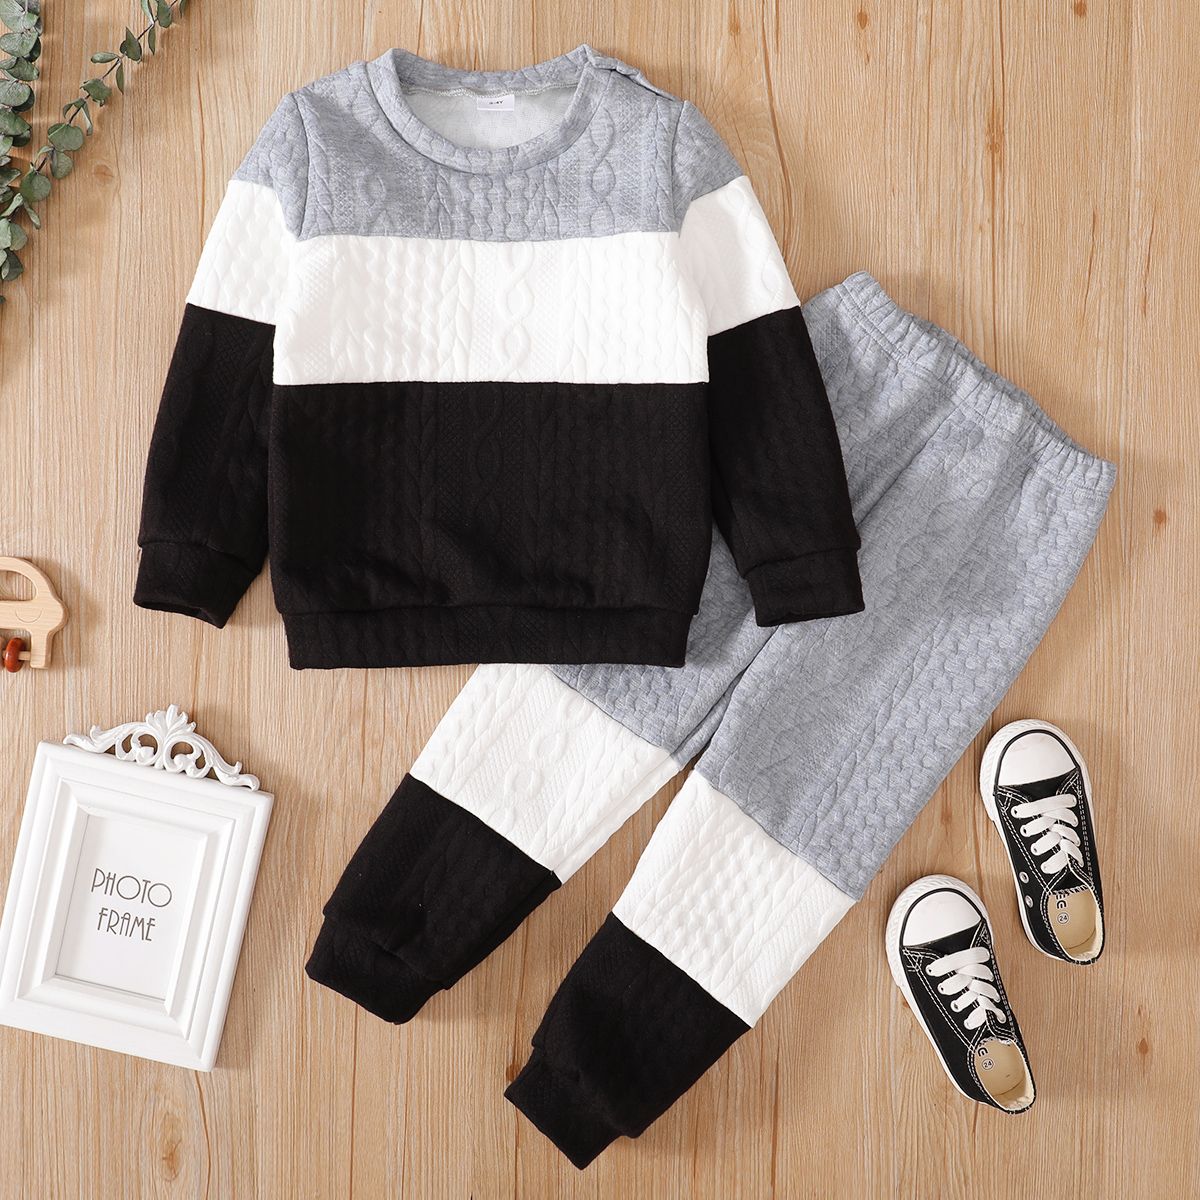 2-piece Toddler Girl/Boy Colorblock Cable Knit Sweatshirt and Pants Set